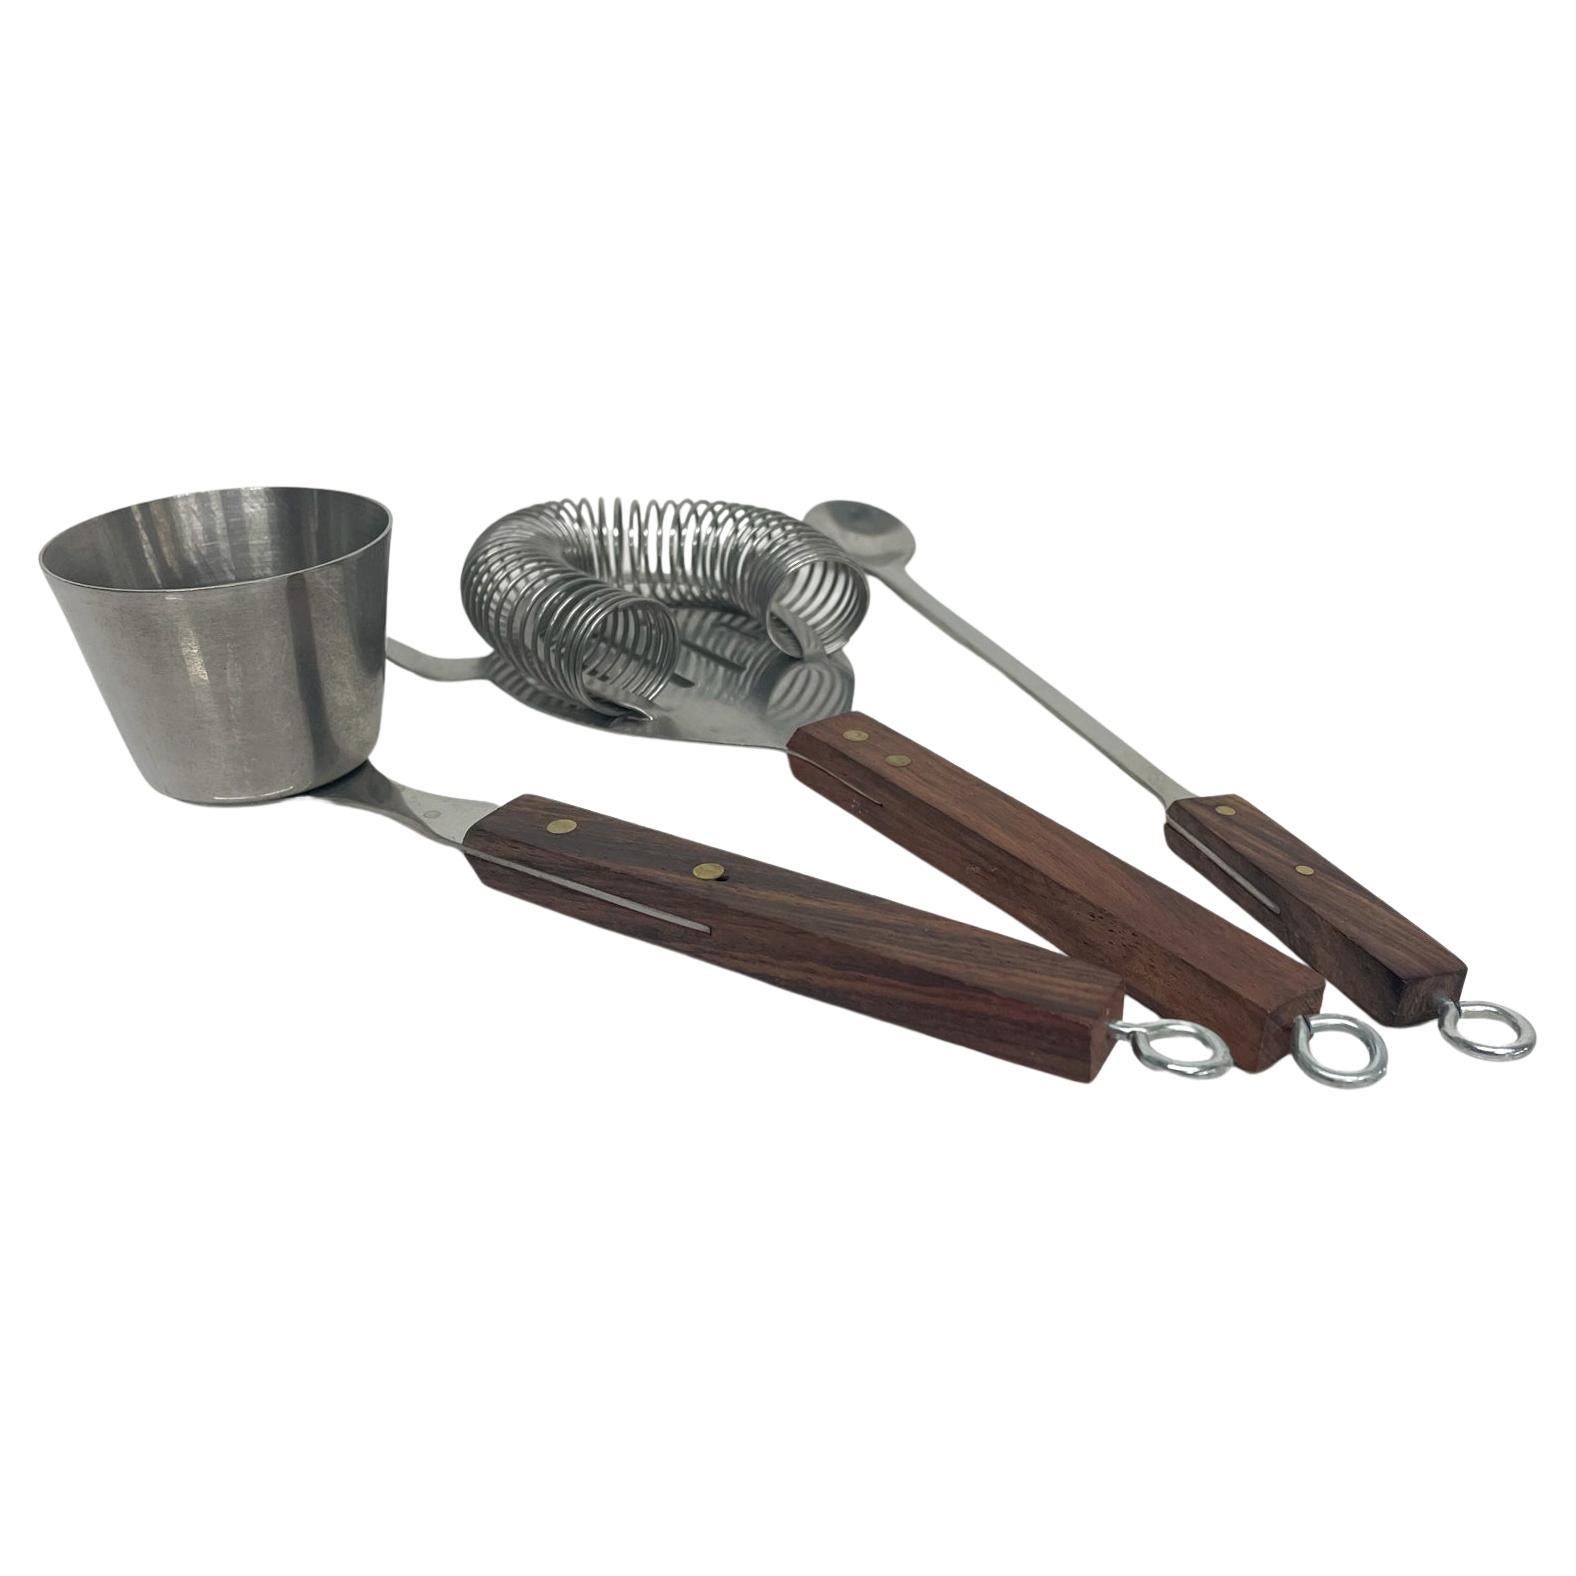 Barware
1960s Japanese modern cocktail bar tool set sculpted stainless steel & tapered rosewood handles
Crafted in stainless steel & rosewood Japan
Spoon 7.88 x 1 W, Stirrup 7.5 x 3.75 W x 1 D, measuring cup 6.75 x 1.88 W x 1.5 D
Condition is